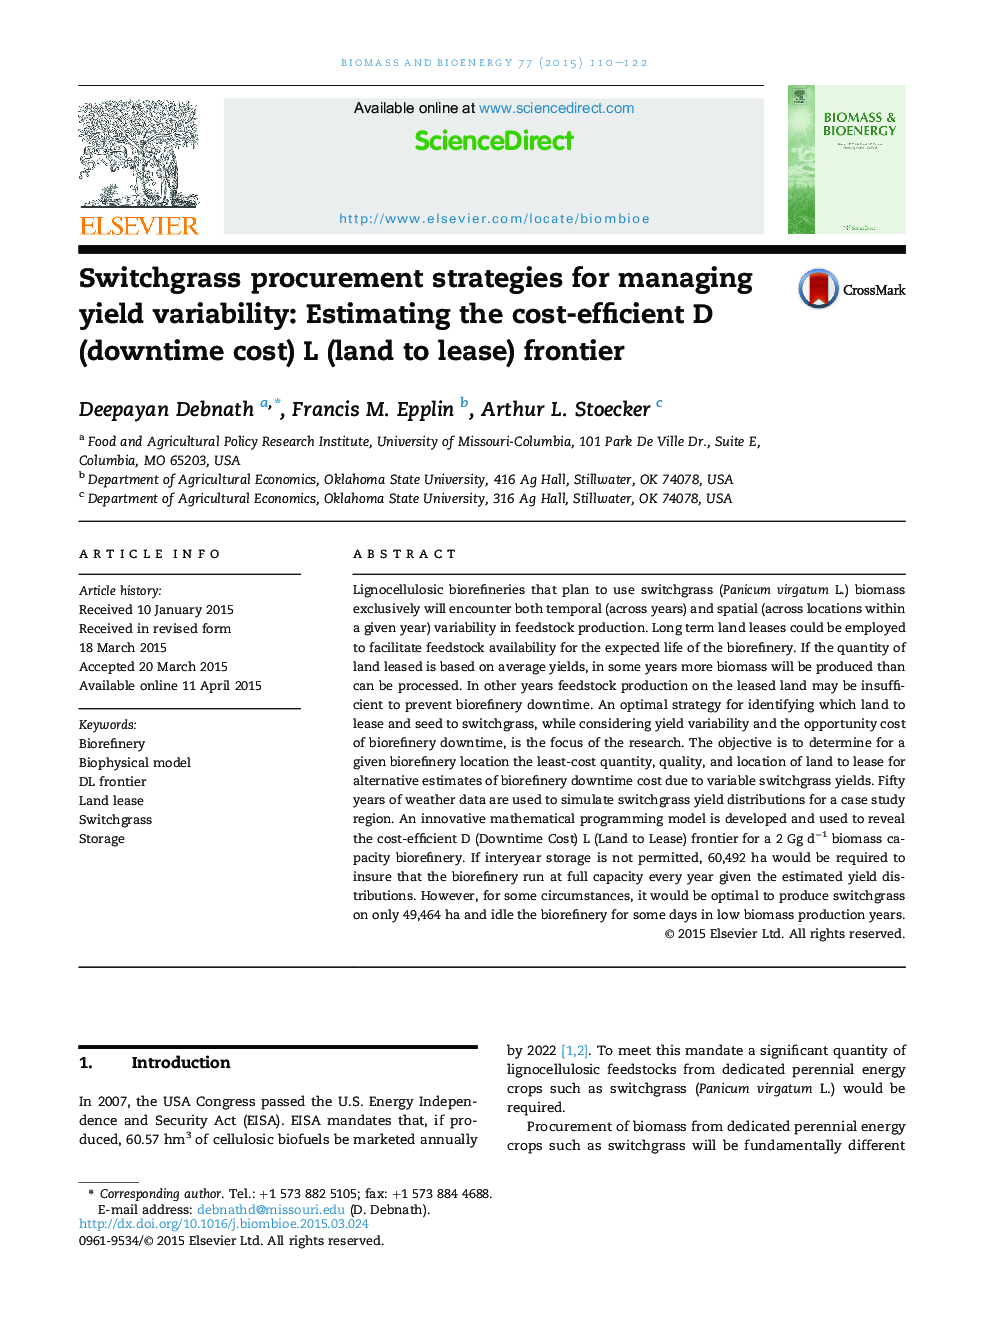 Switchgrass procurement strategies for managing yield variability: Estimating the cost-efficient D (downtime cost) L (land to lease) frontier